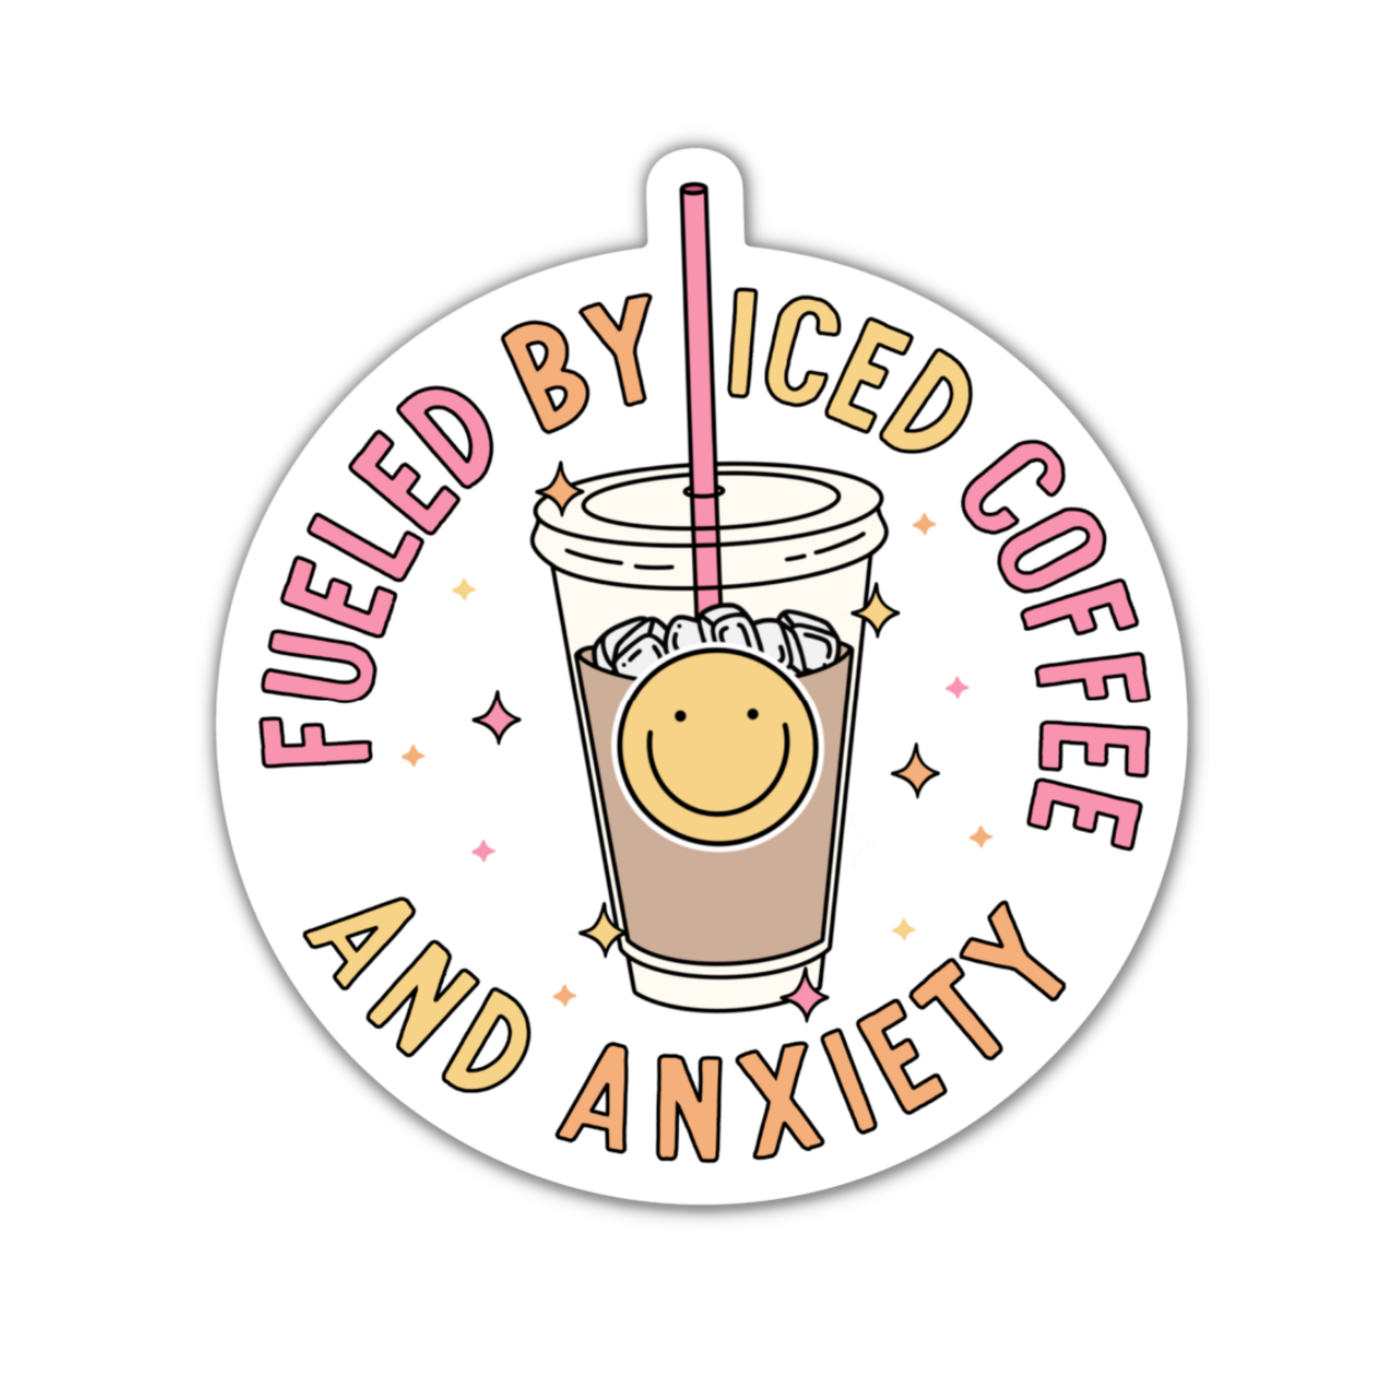 The Playful Pineapple - Fueled By Iced Coffee And Anxiety Vinyl Sticker - The Local Space